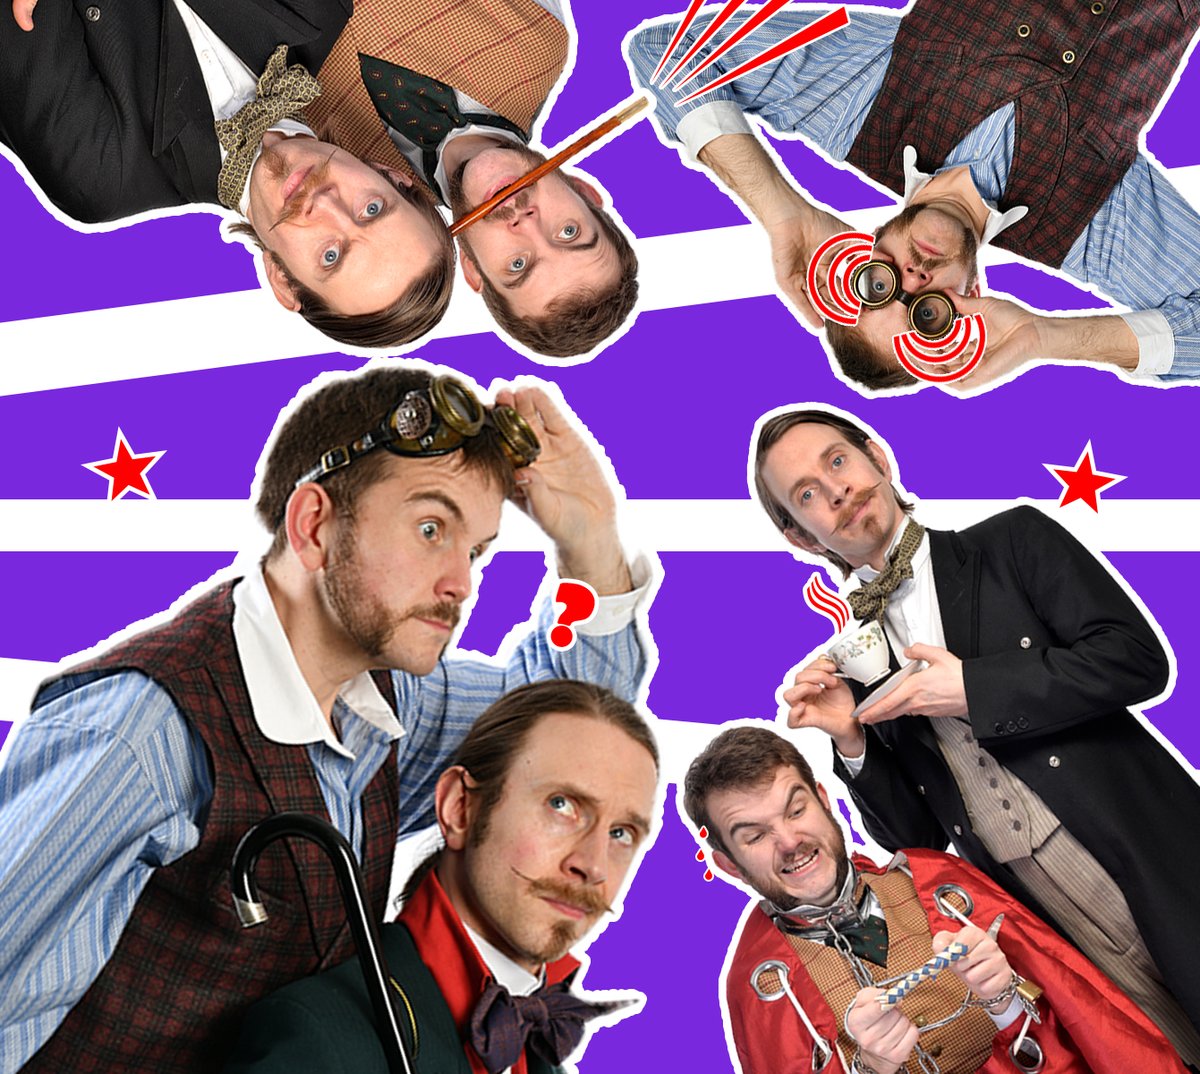 📣 Roll up, roll up! Morgan & West are back with a massive magic show for kids! Expect gawps, gasps, and guffaws in this relentlessly funny and fantastical magic filled extravaganza! Guaranteed to delight those aged 5 through to 105! 📅 Sat 20 Apr, 2pm 🎟️ stantonburytheatre.ticketsolve.com/ticketbooth/sh…